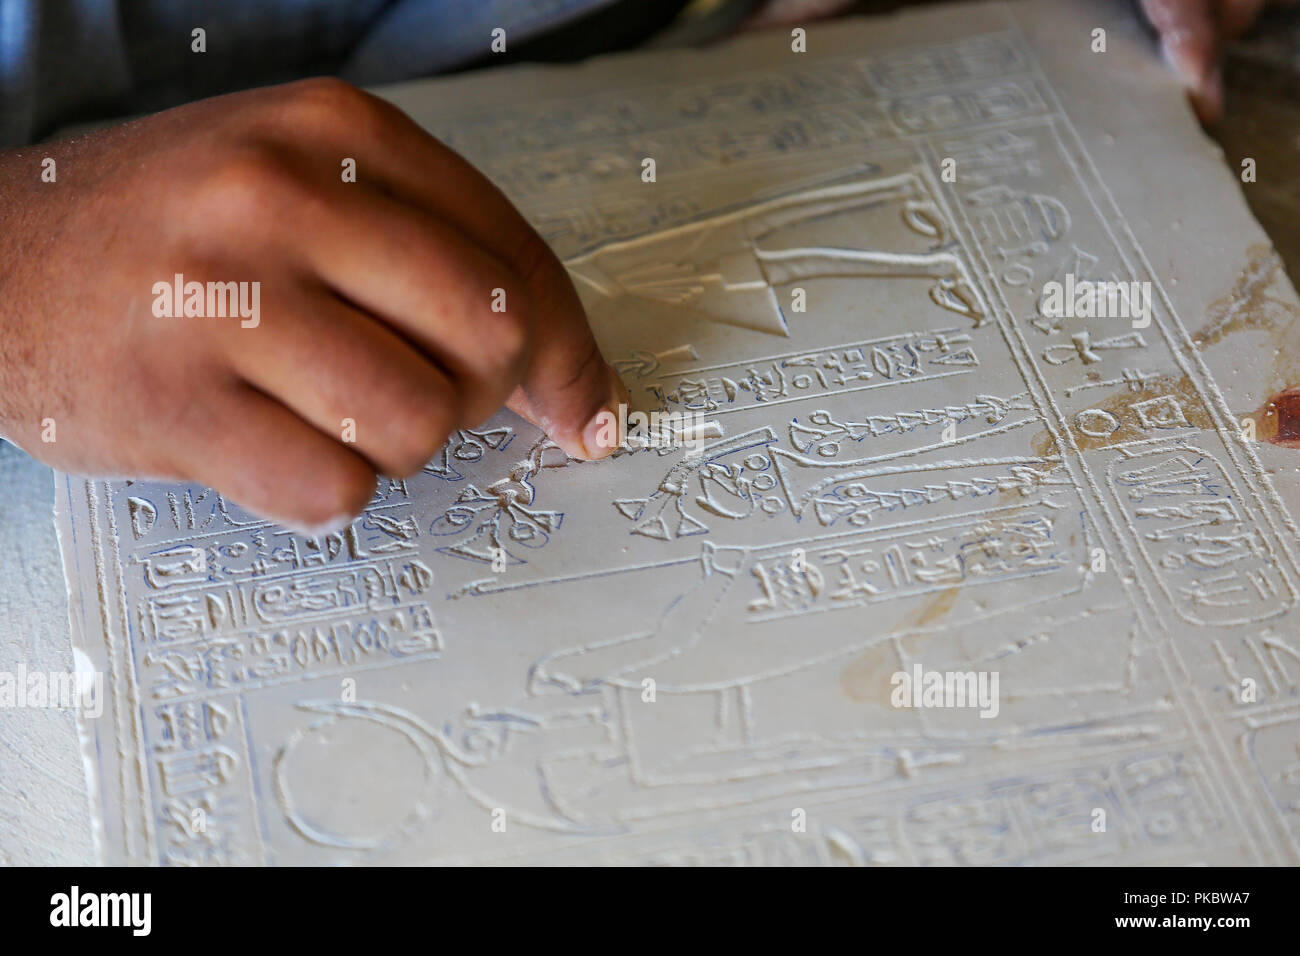 An skilled craftsman carving a limestone plaque at an Alabaster factory and shop in Egypt, Africa Stock Photo